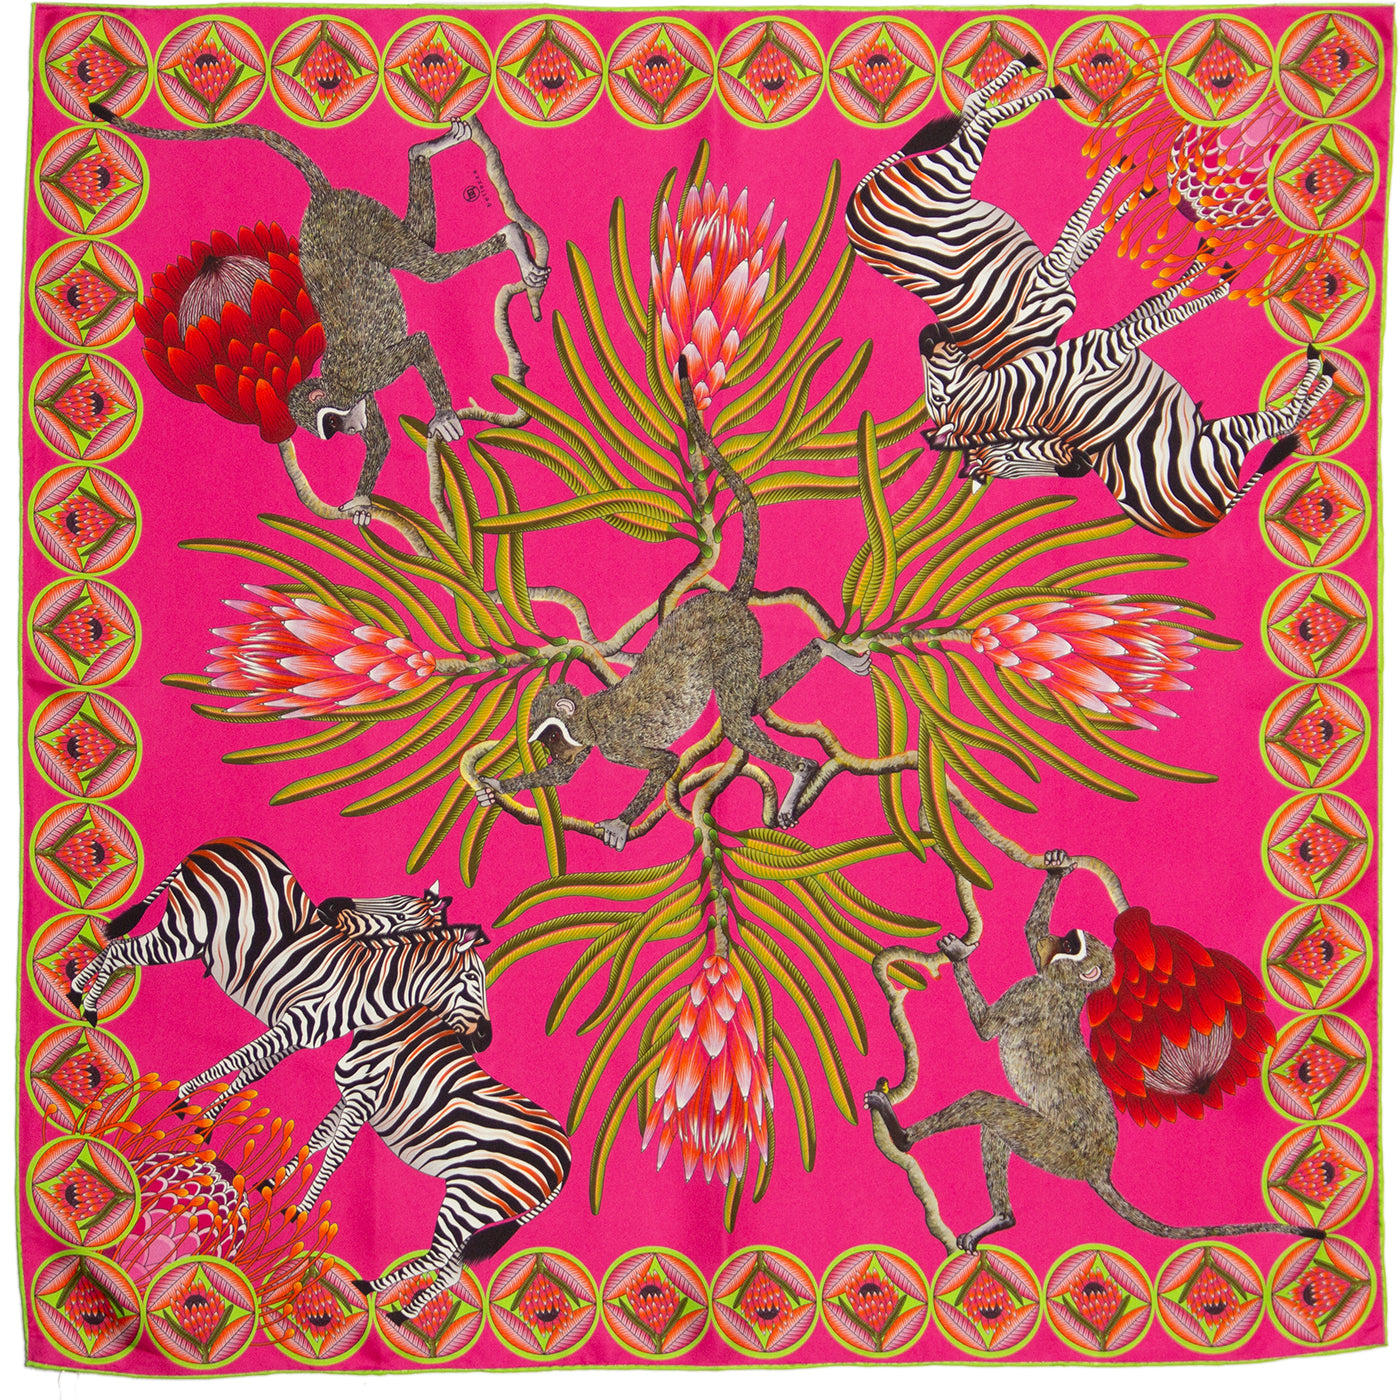 Pink and orange silk scarf with Zebras Monkies and Protea flowers